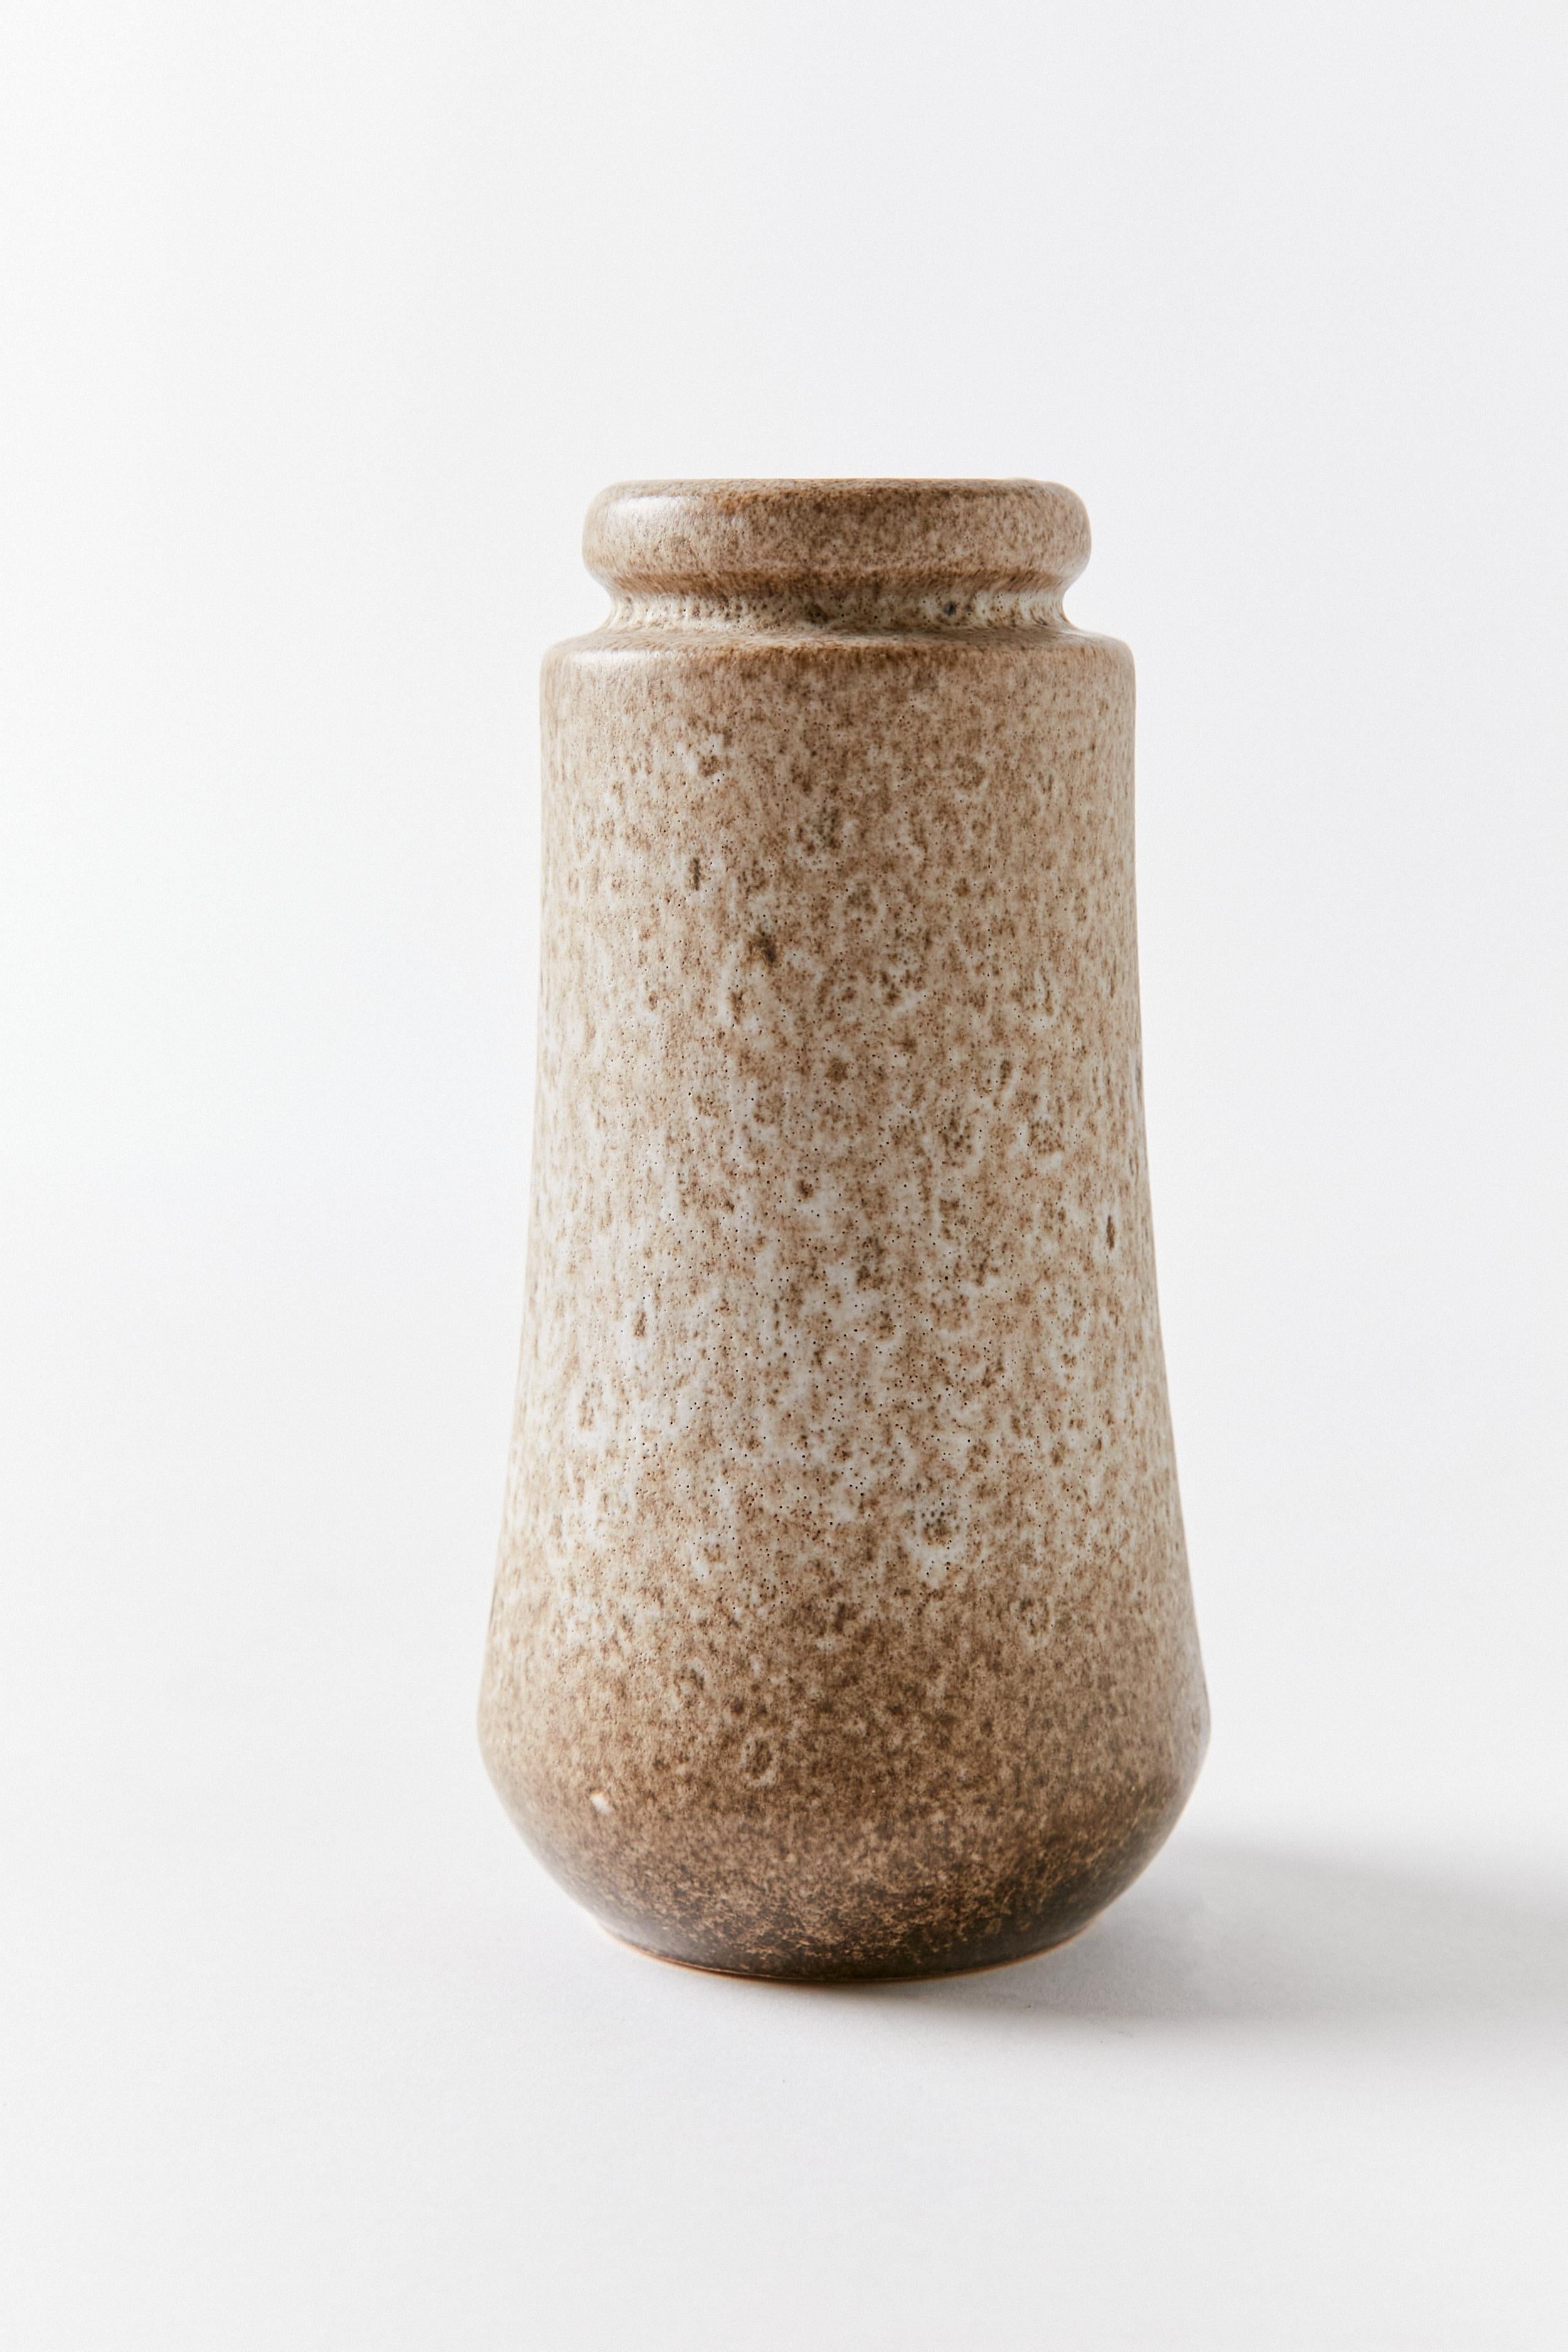 Fat lava vase with texture sand tones. Made by Scheurich Keramik, West Germany 1960s. Signature stamp on bottom.